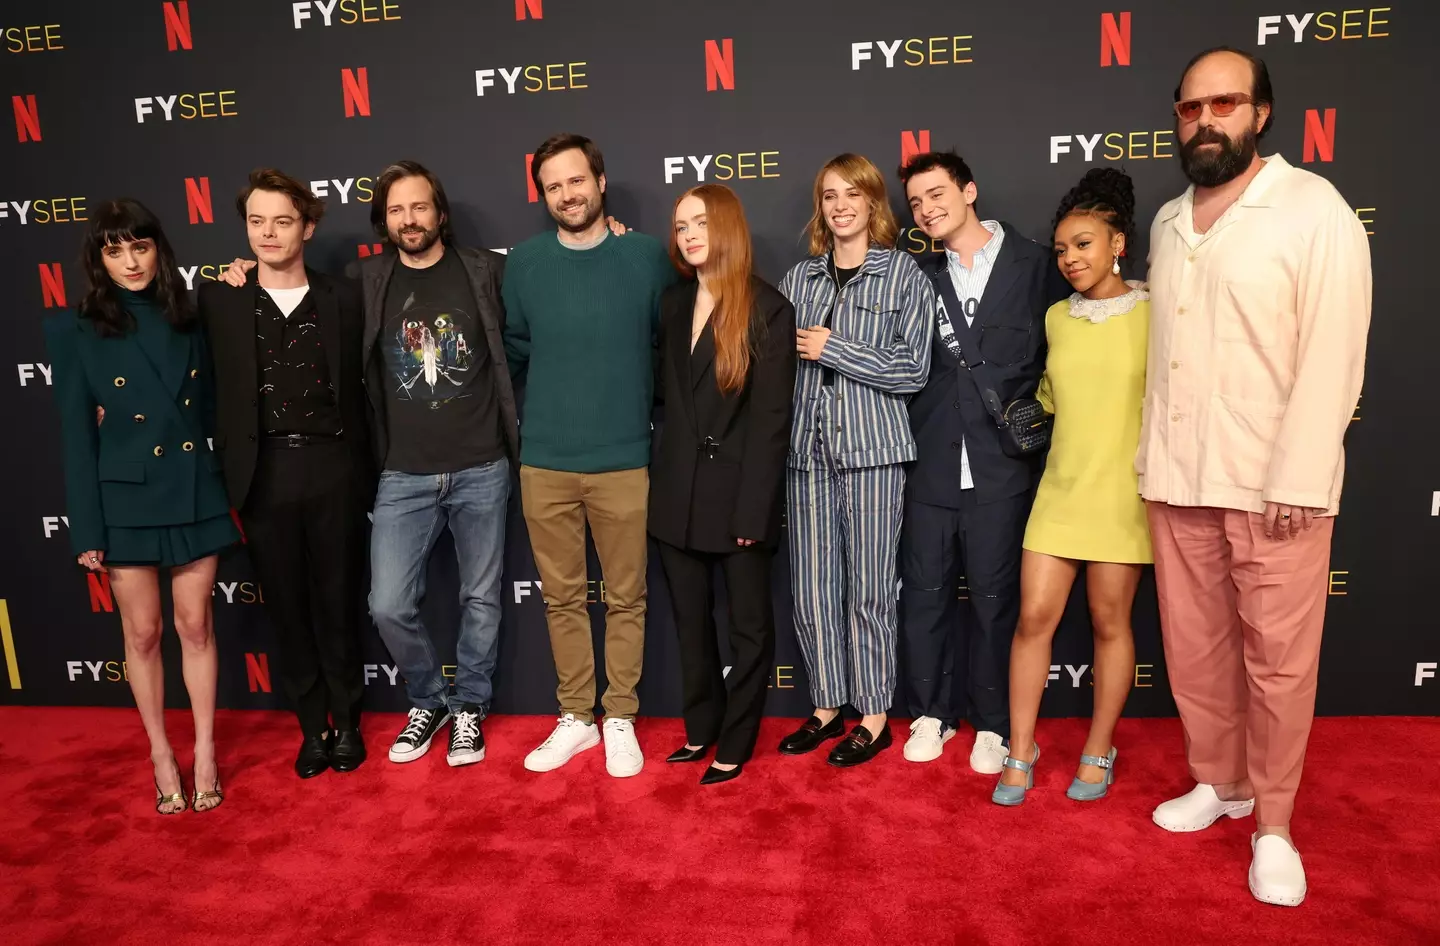 The Duffer brothers and some Stranger Things cast members.